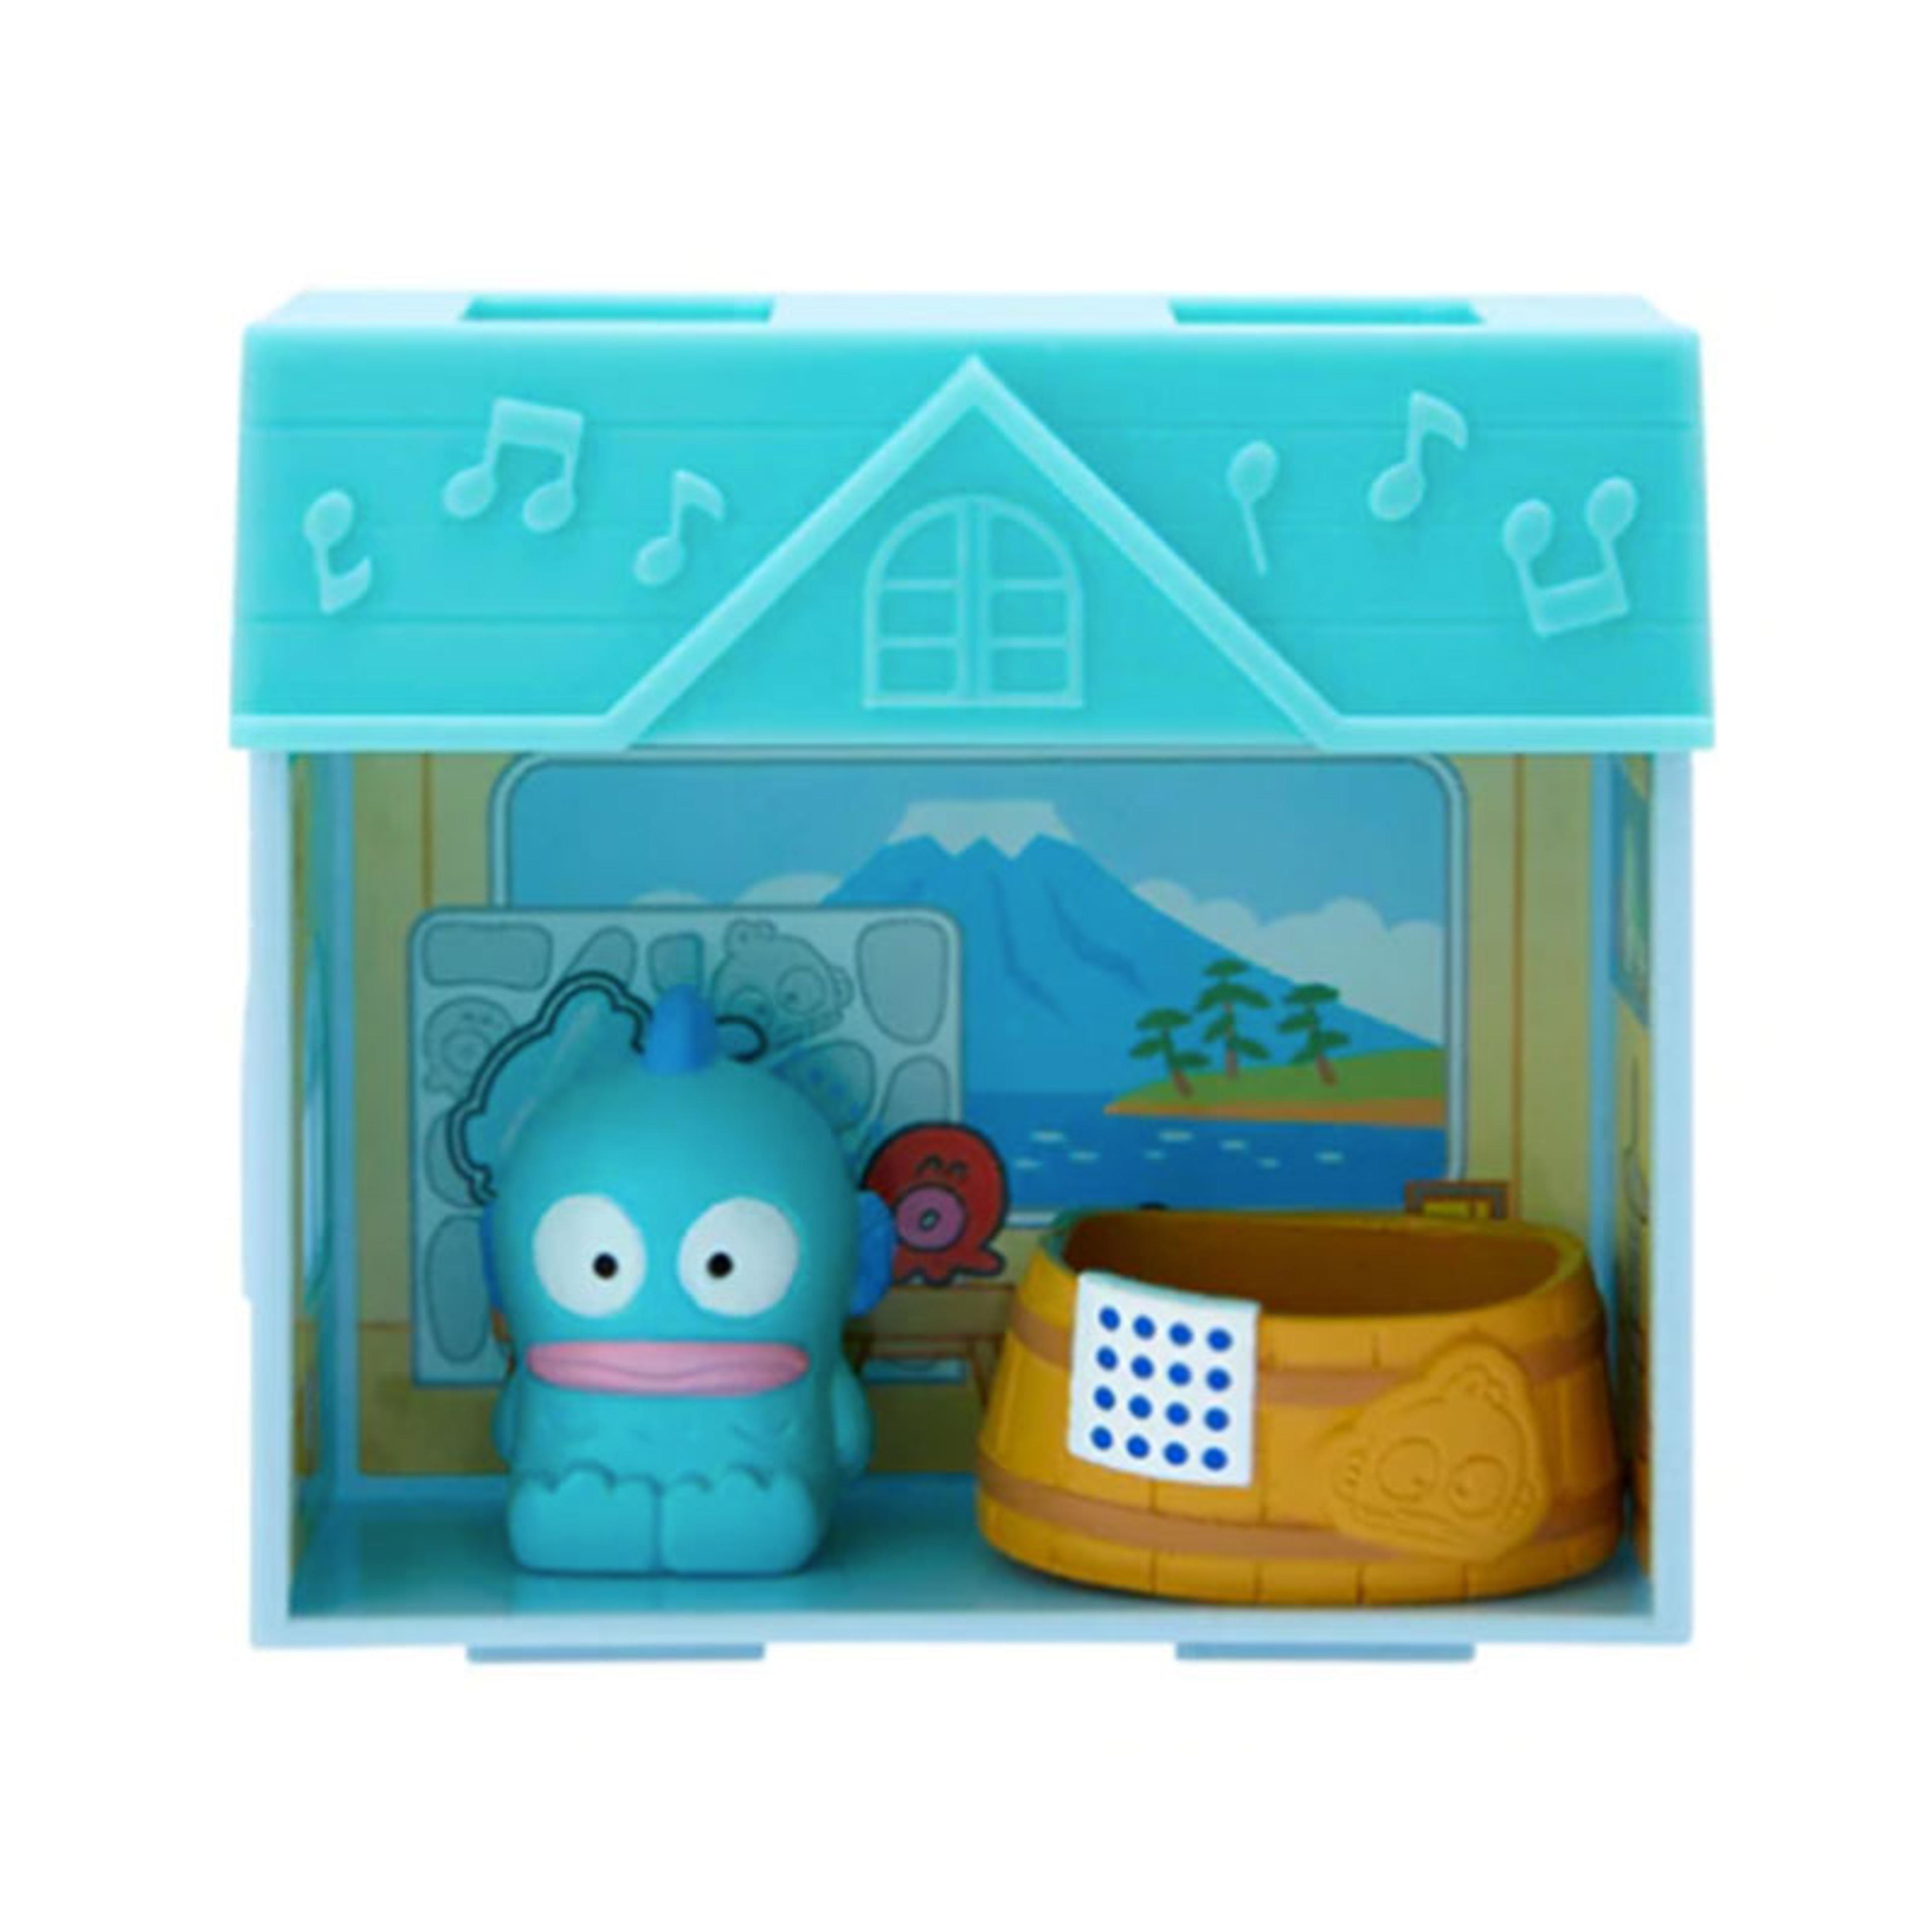 Alternate View 5 of Sanrio Characters Miniature House